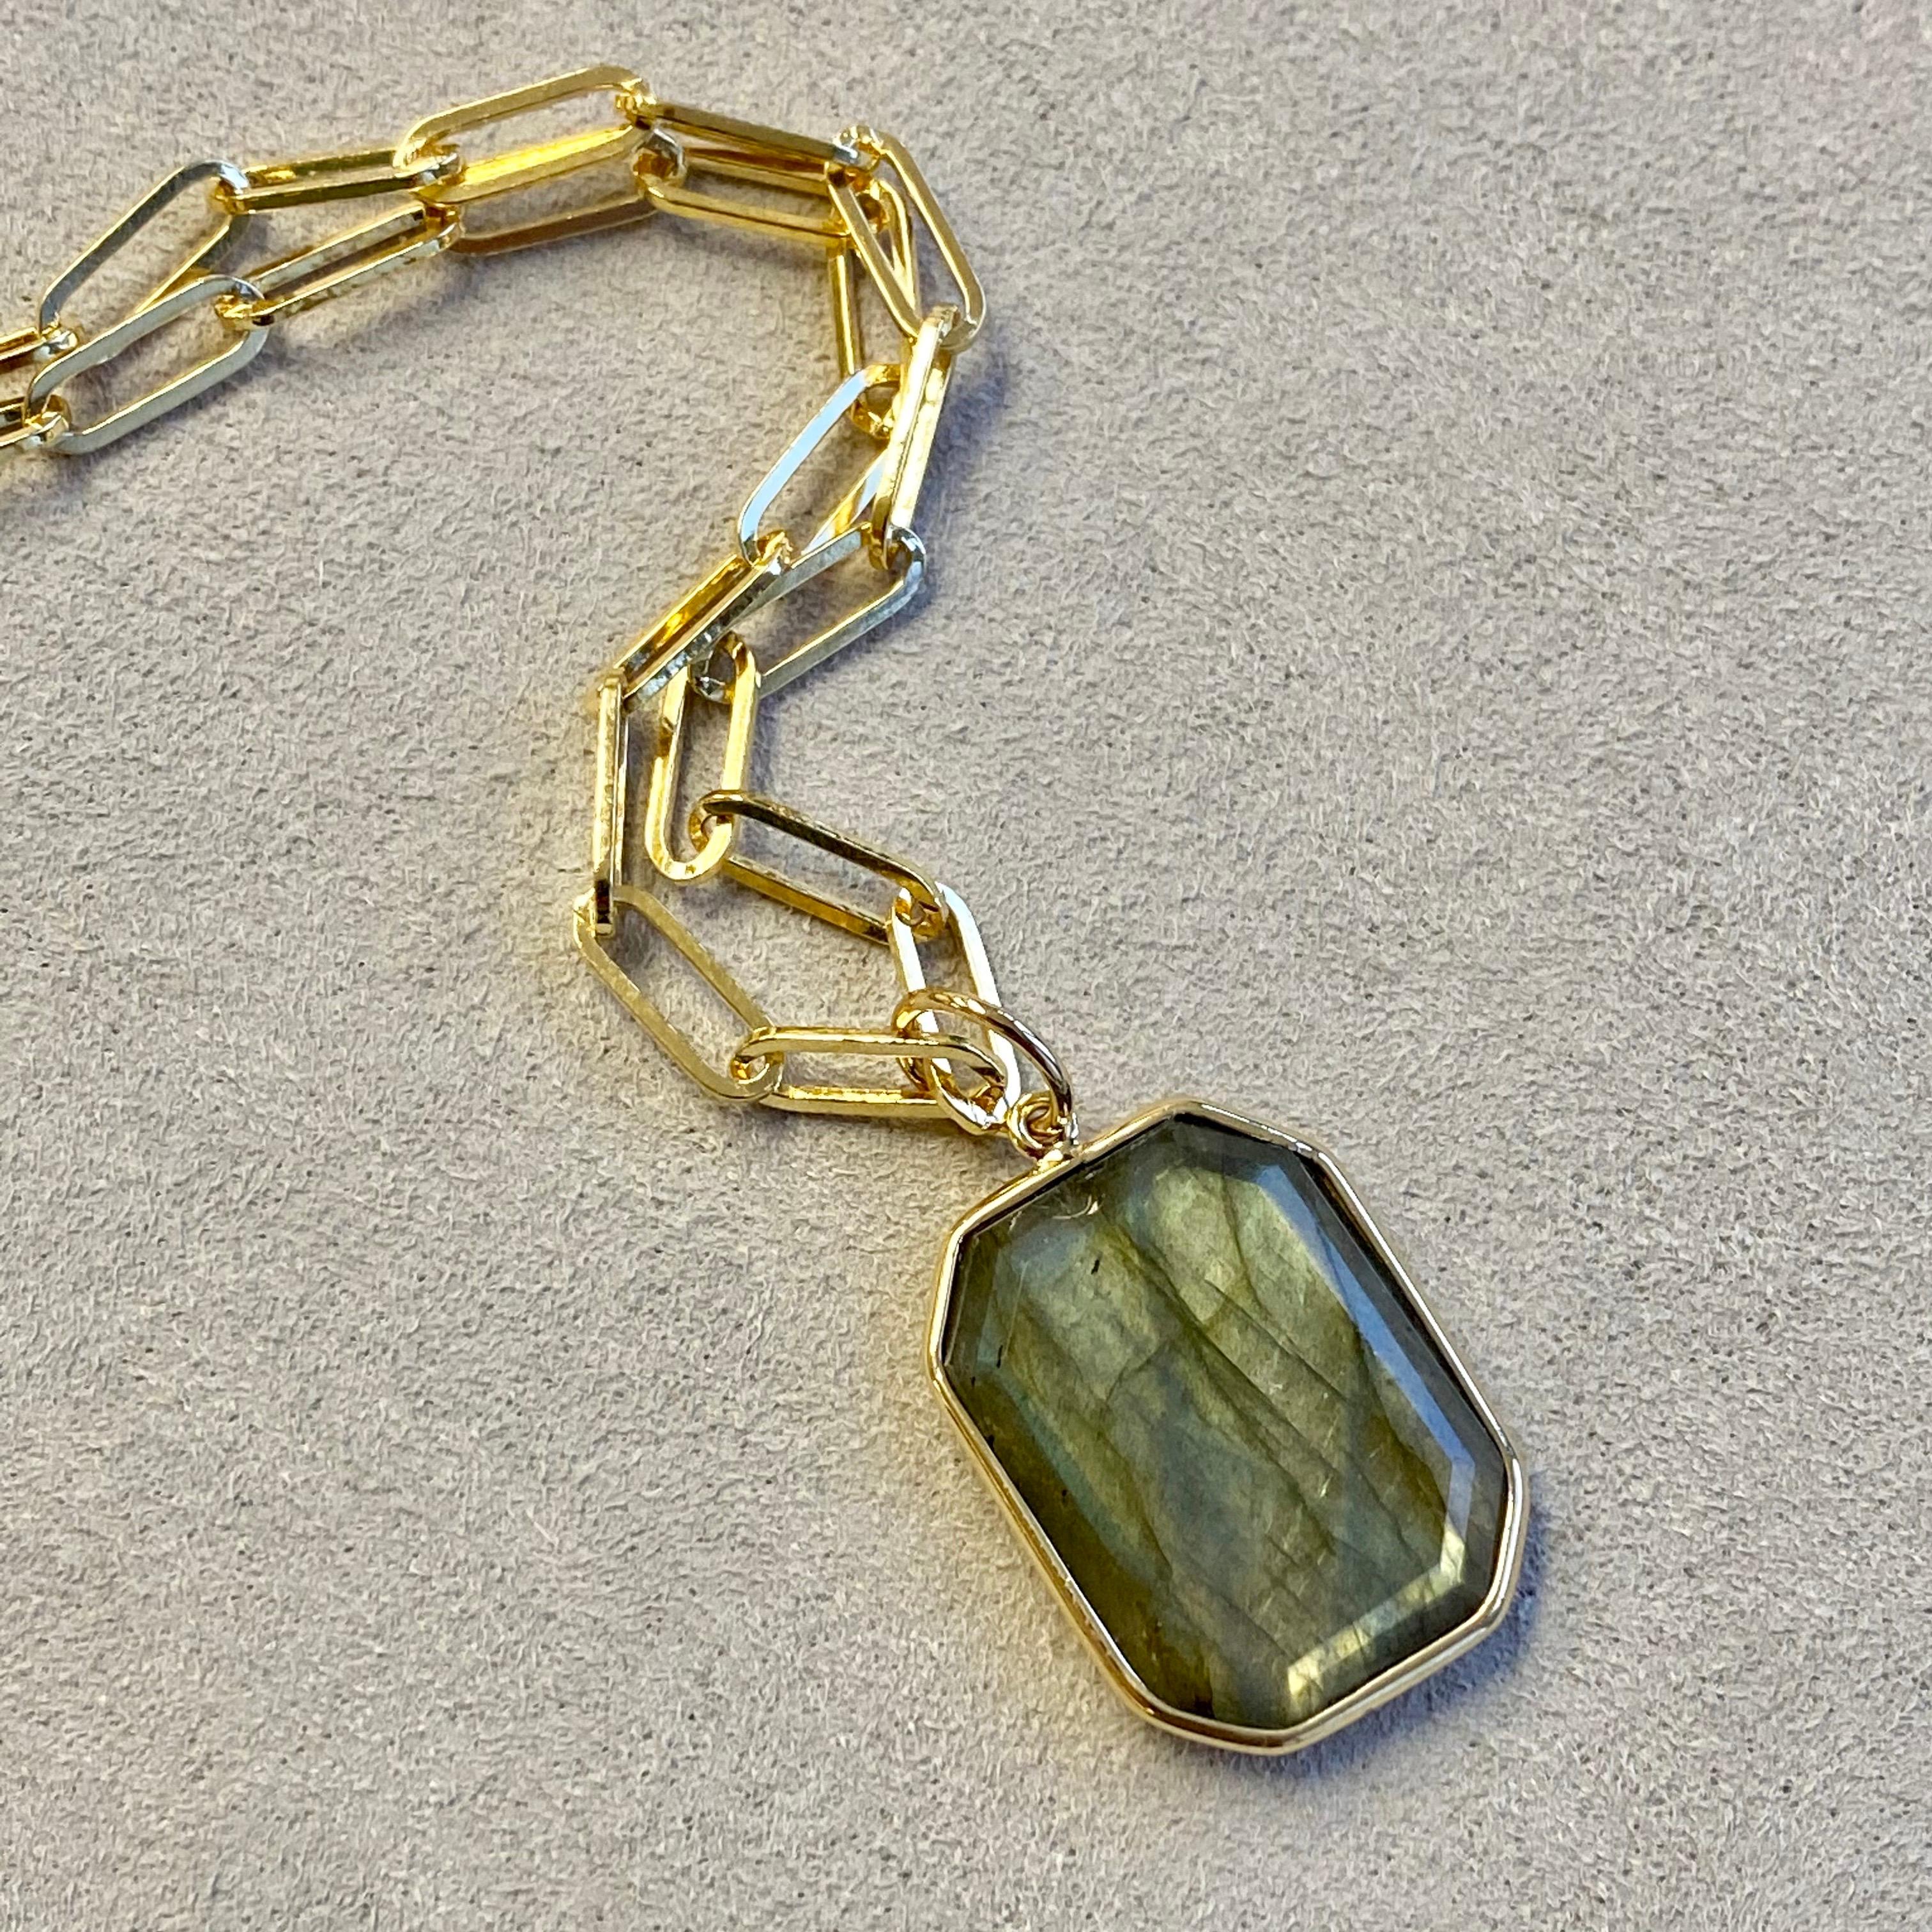 Created in 18 karat yellow gold
Labradorite 10 carats approx.
Chain sold separately
Limited Edition

Exquisitely crafted in 18 karat yellow gold, this limited edition pendant features a stunning labradorite gemstone, weighing in at around 10 carats.